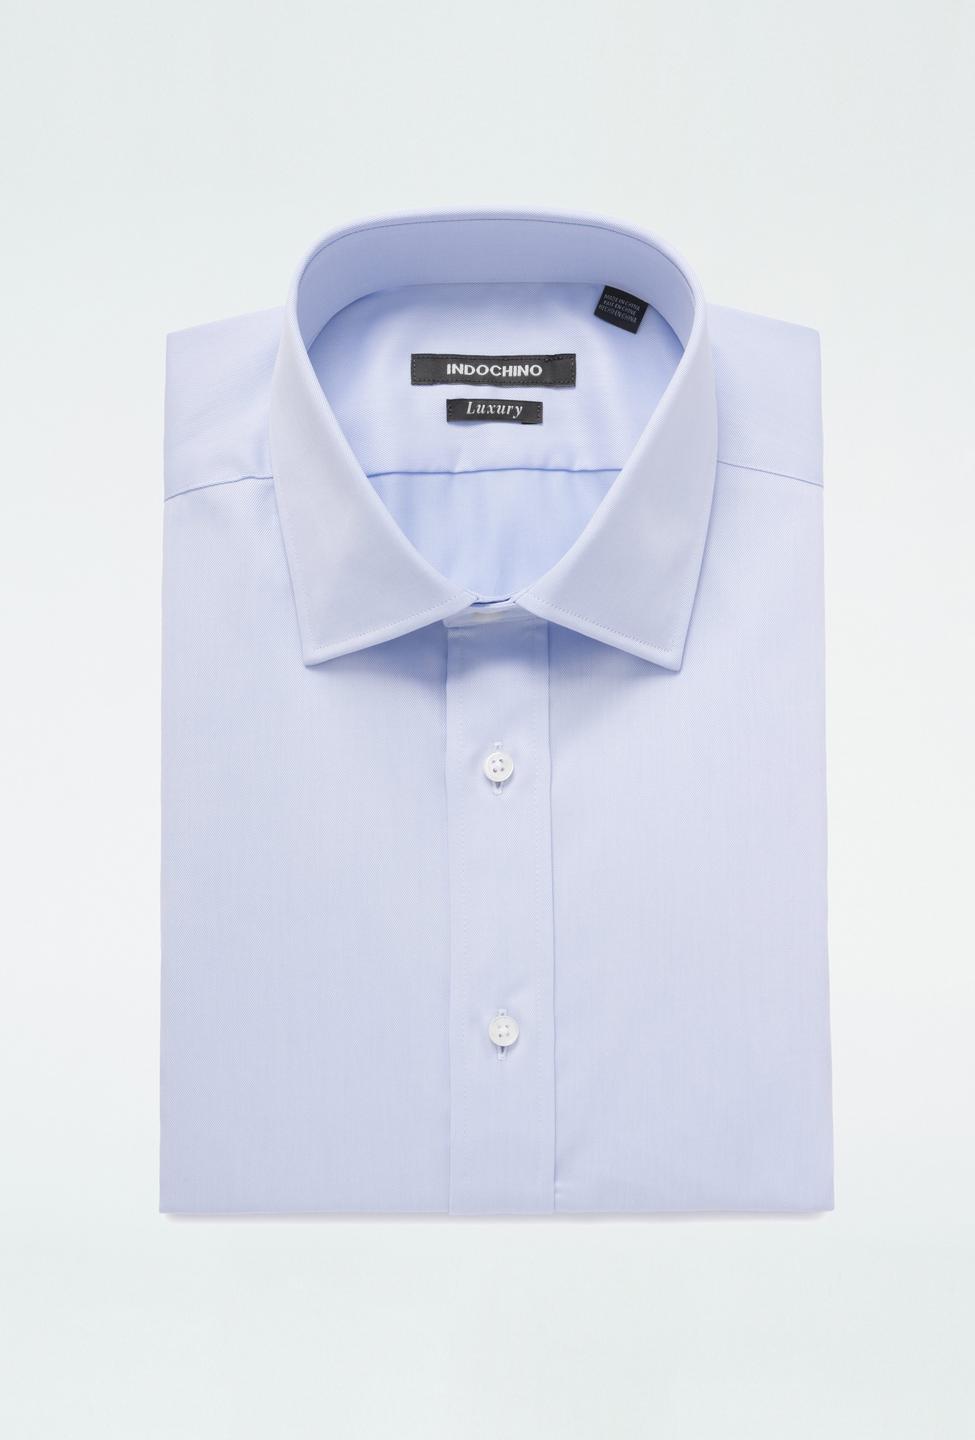 Blue shirt - Hyde Solid Design from Luxury Indochino Collection